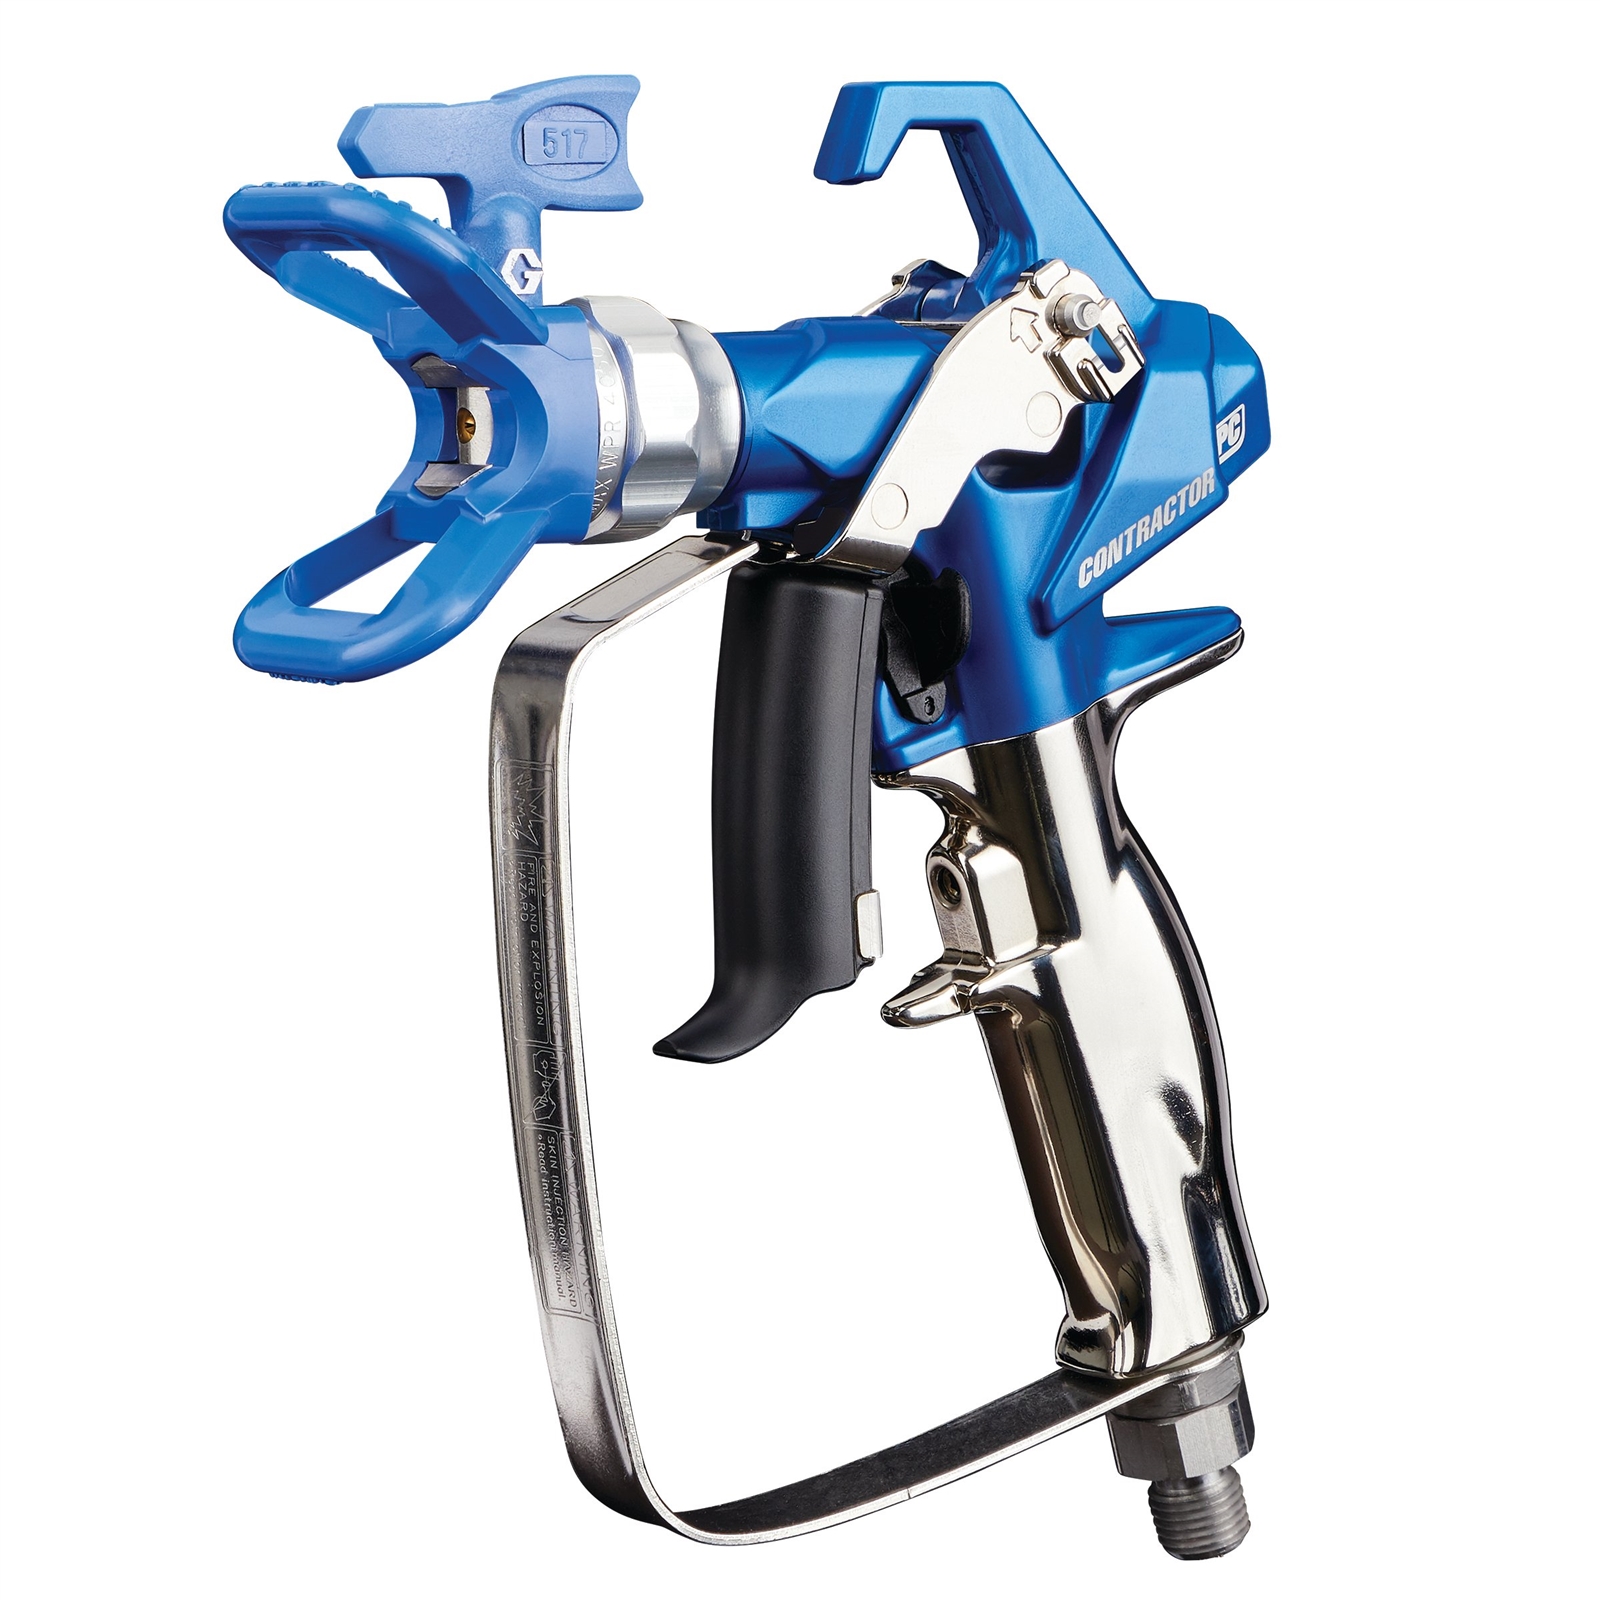 Graco GRACO 235457 Airless Spray Gun Without Guard 